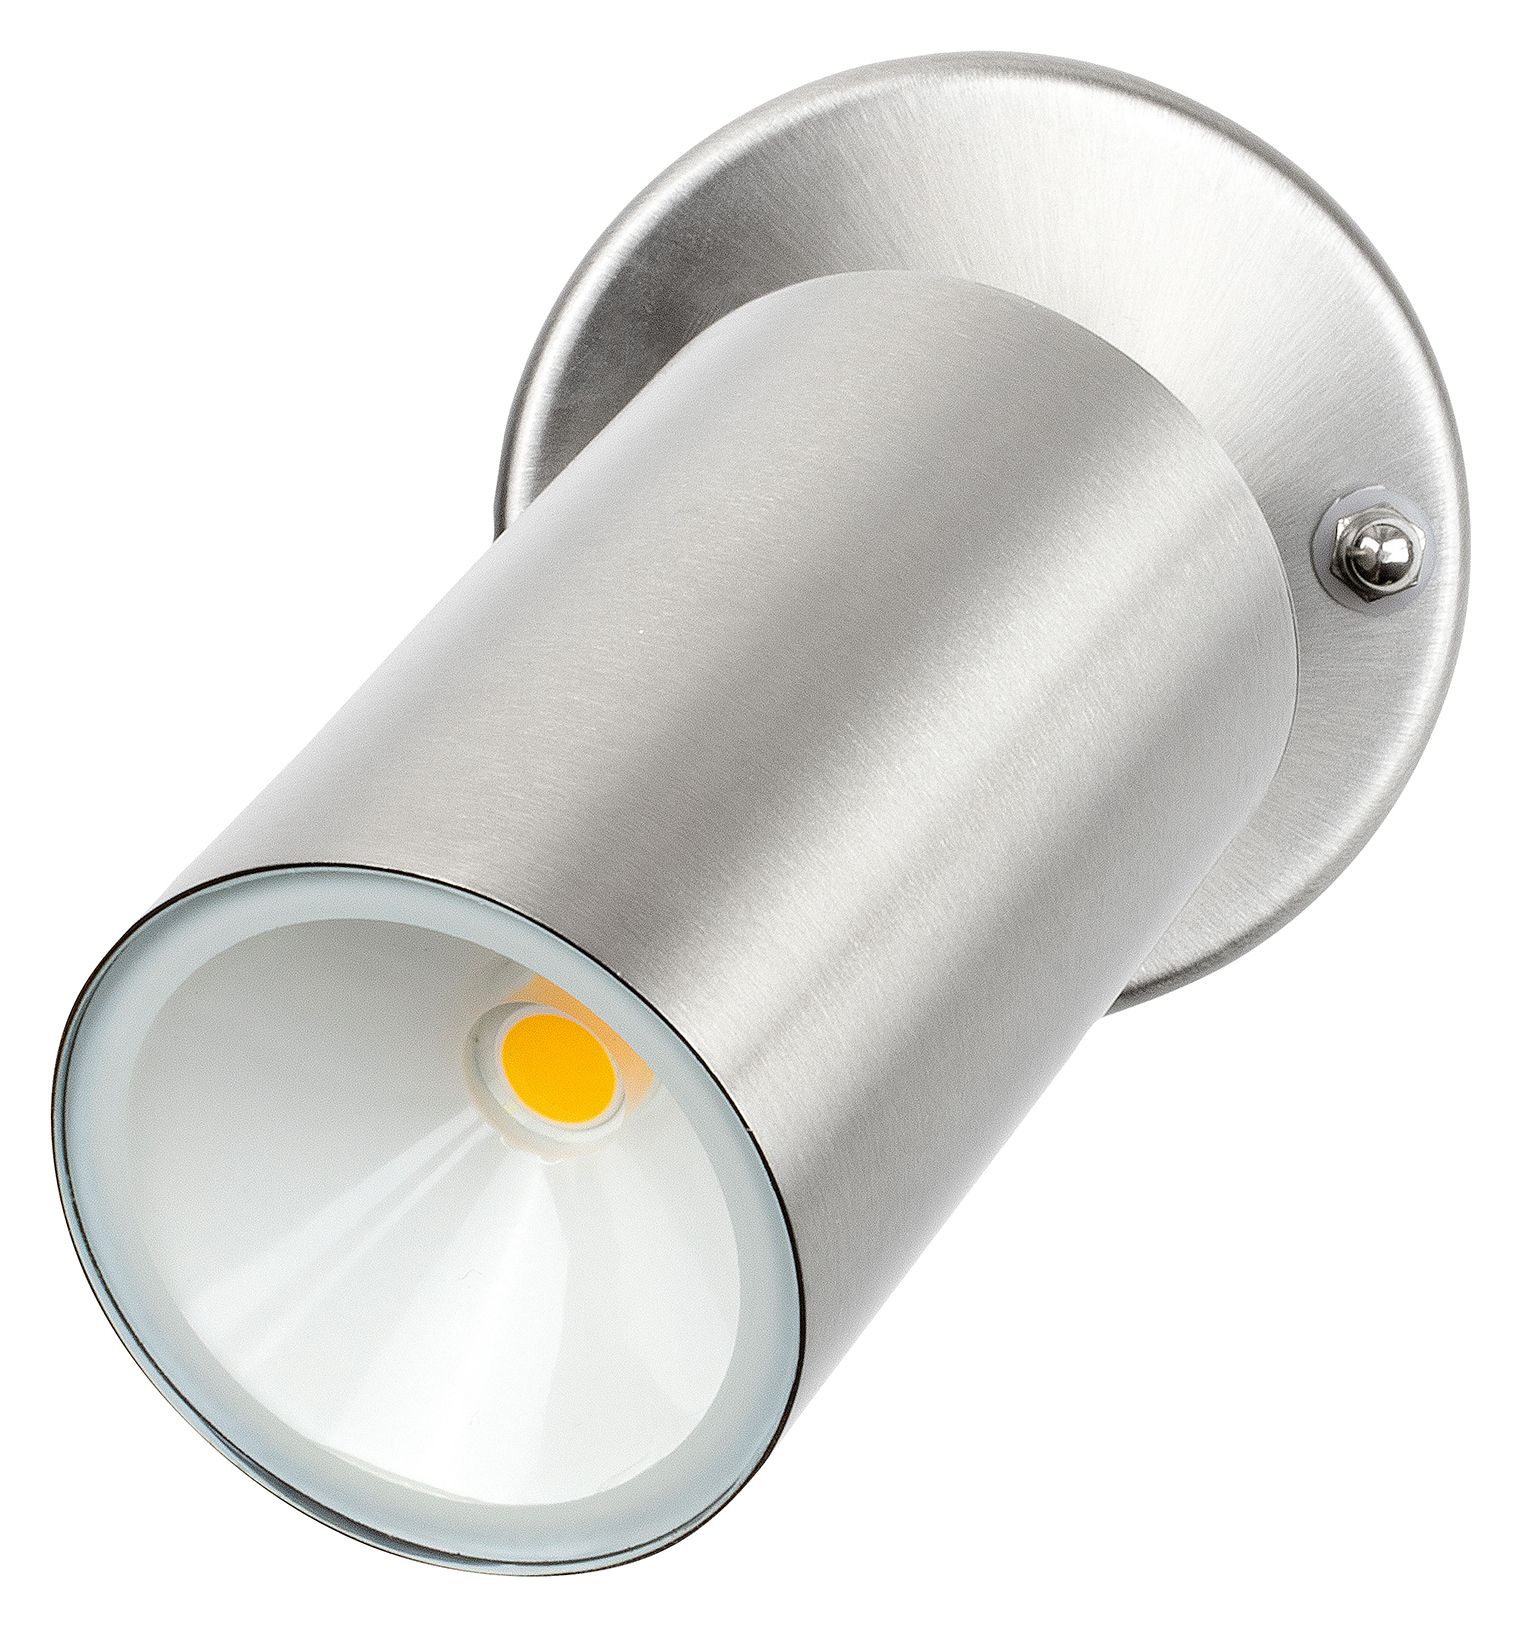 Luceco LED Single Head Stainless Steel Adjustable Wall Light 4W 300LM 3000K